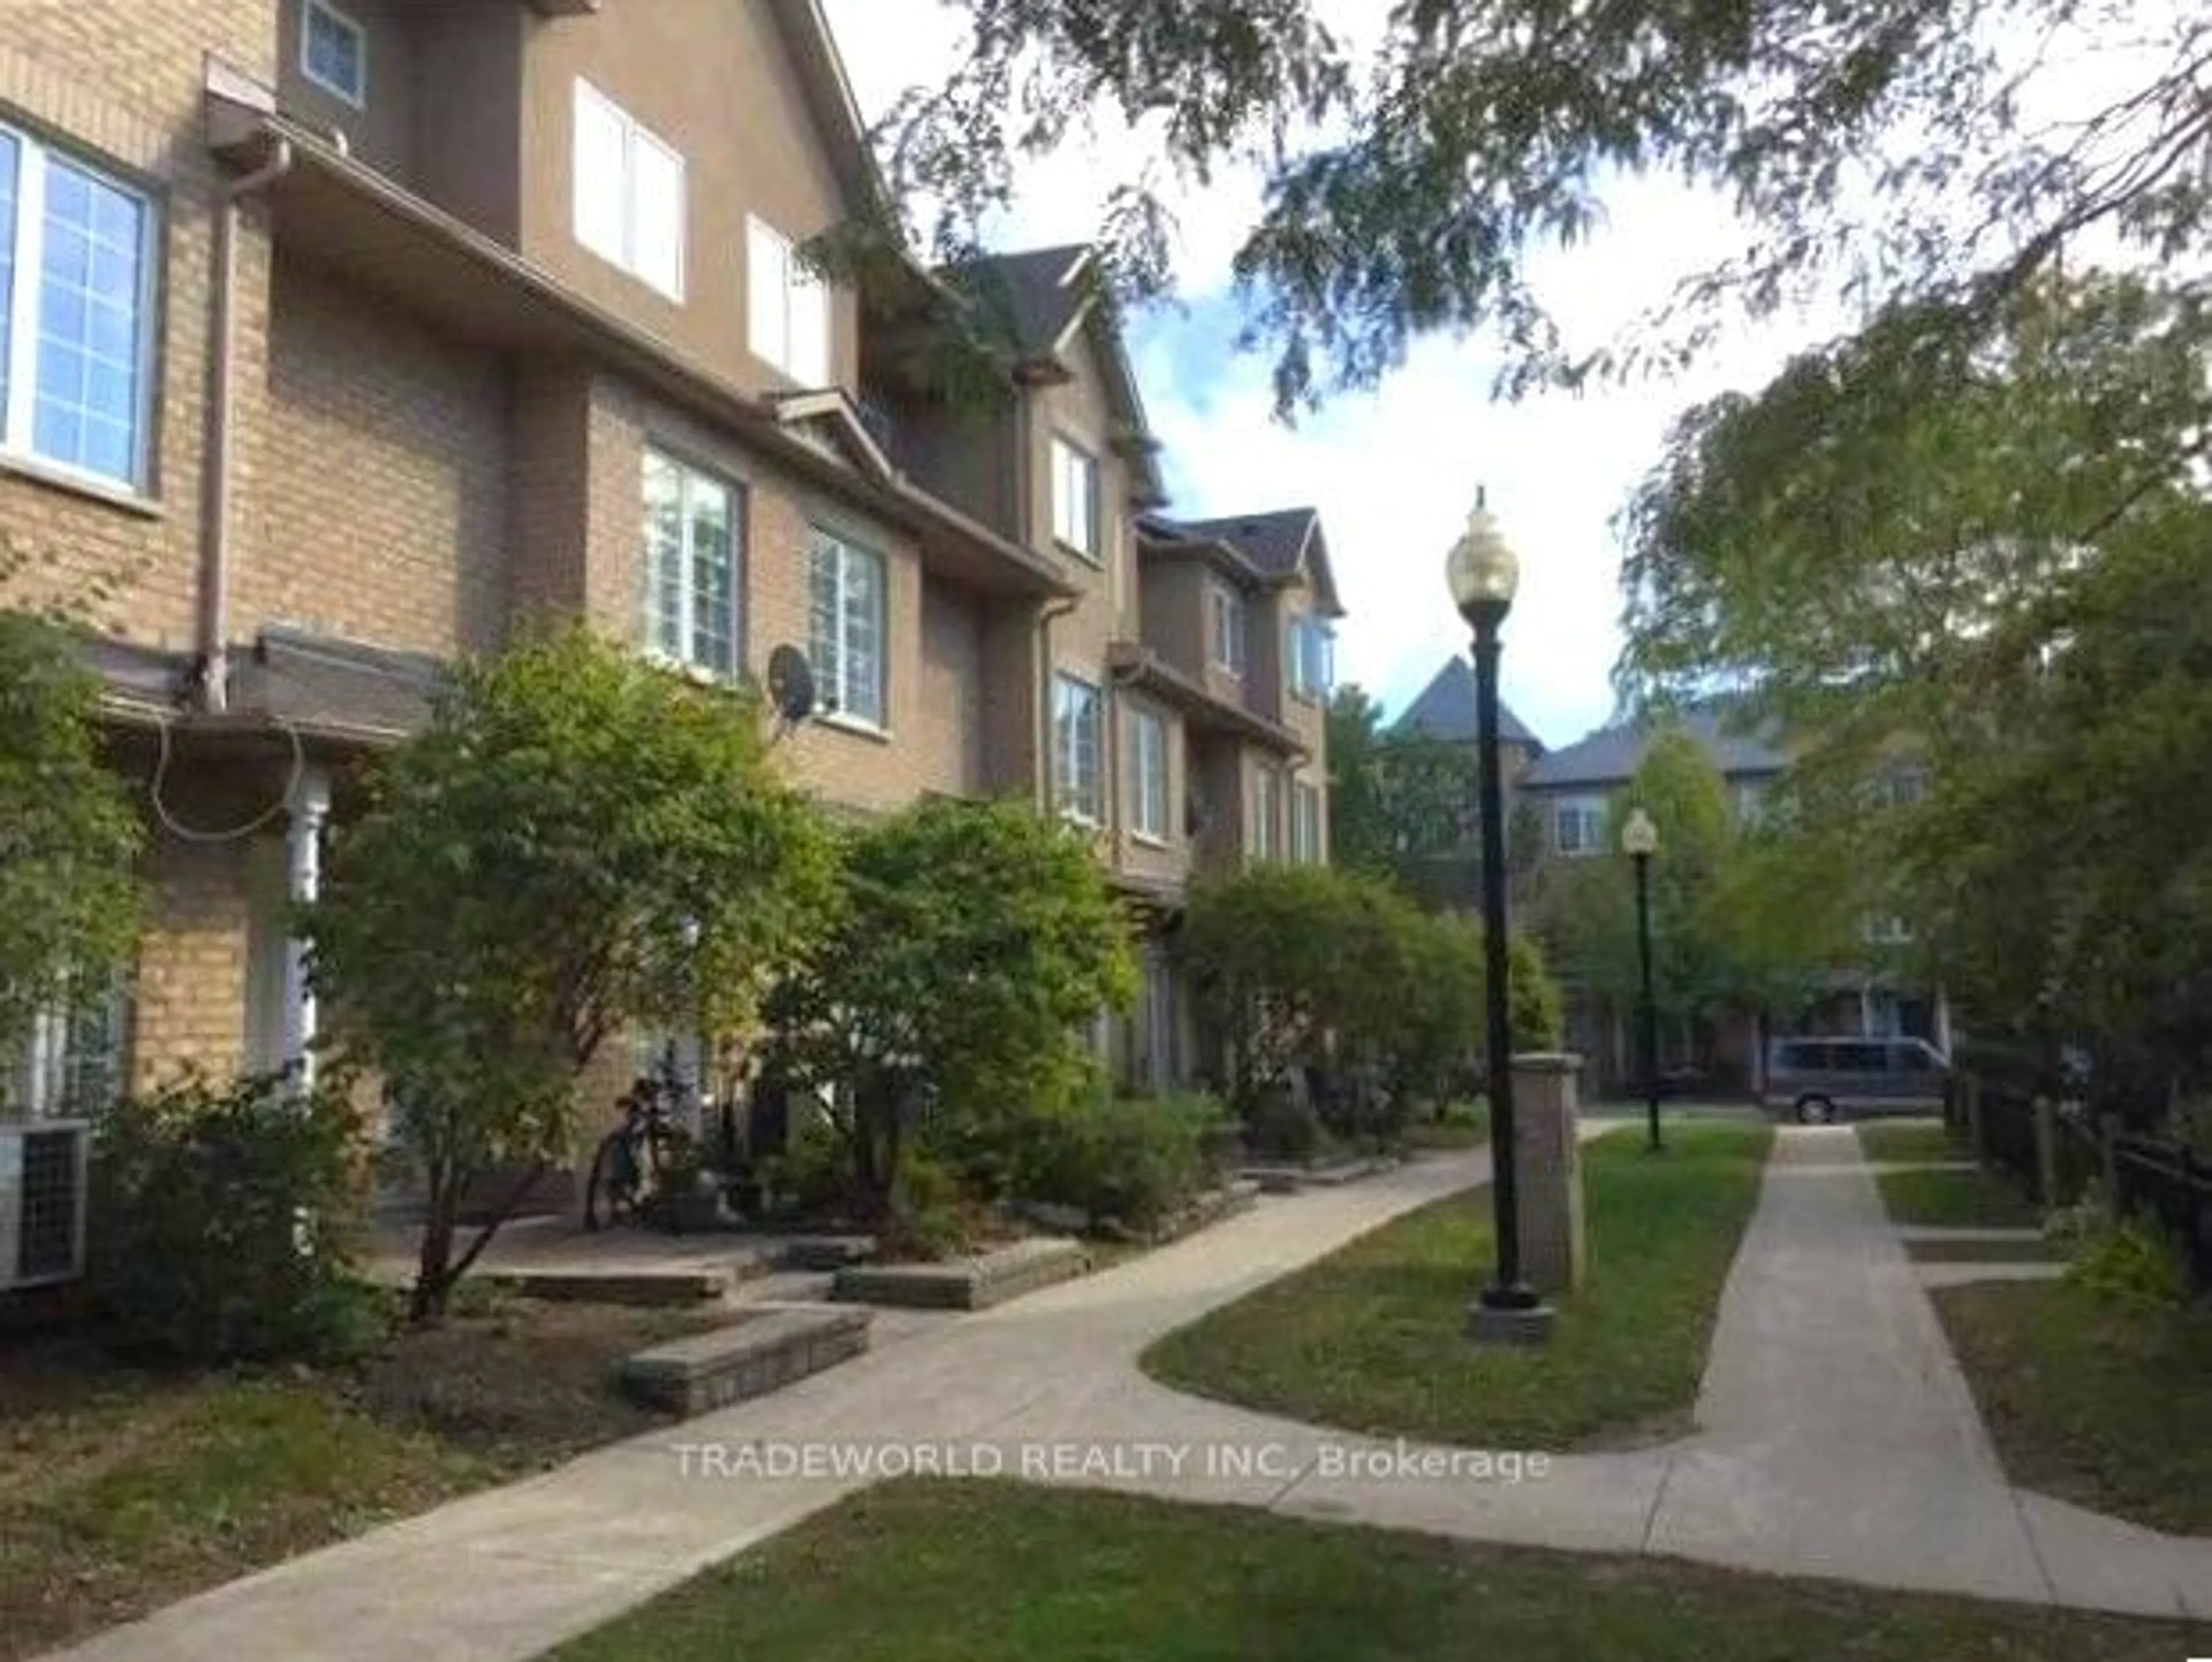 Home with brick exterior material for 22 St Moritz Way #2, Markham Ontario L3R 4G4